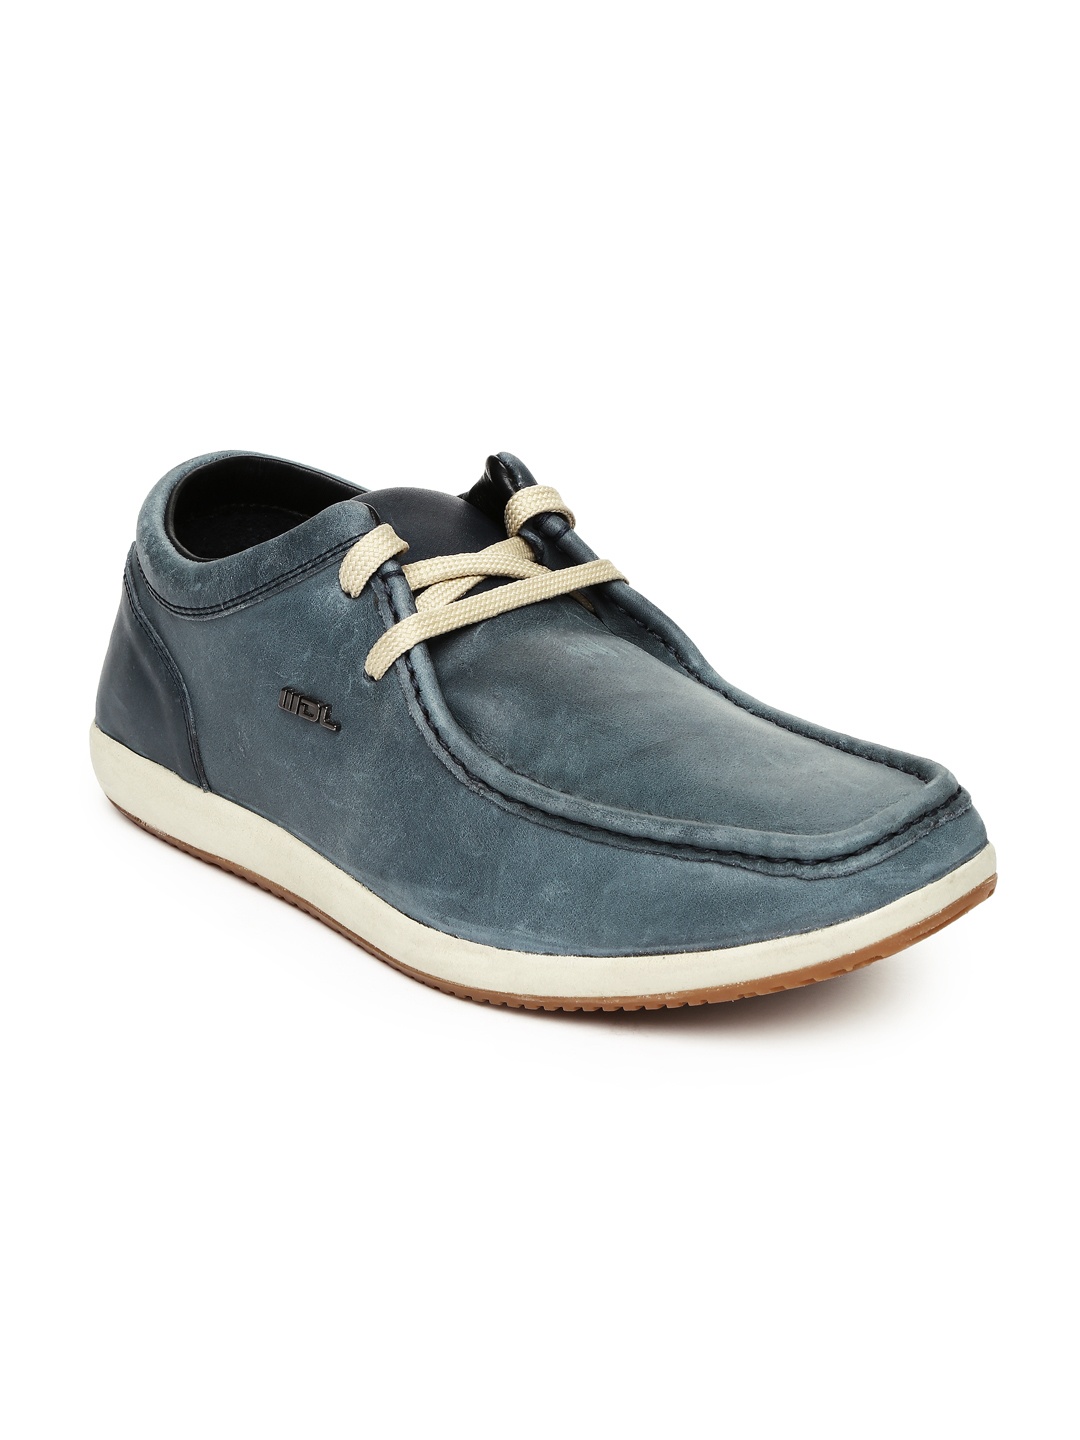 Myntra Woodland Men Blue Leather Casual Shoes 699008 | Buy Myntra ...